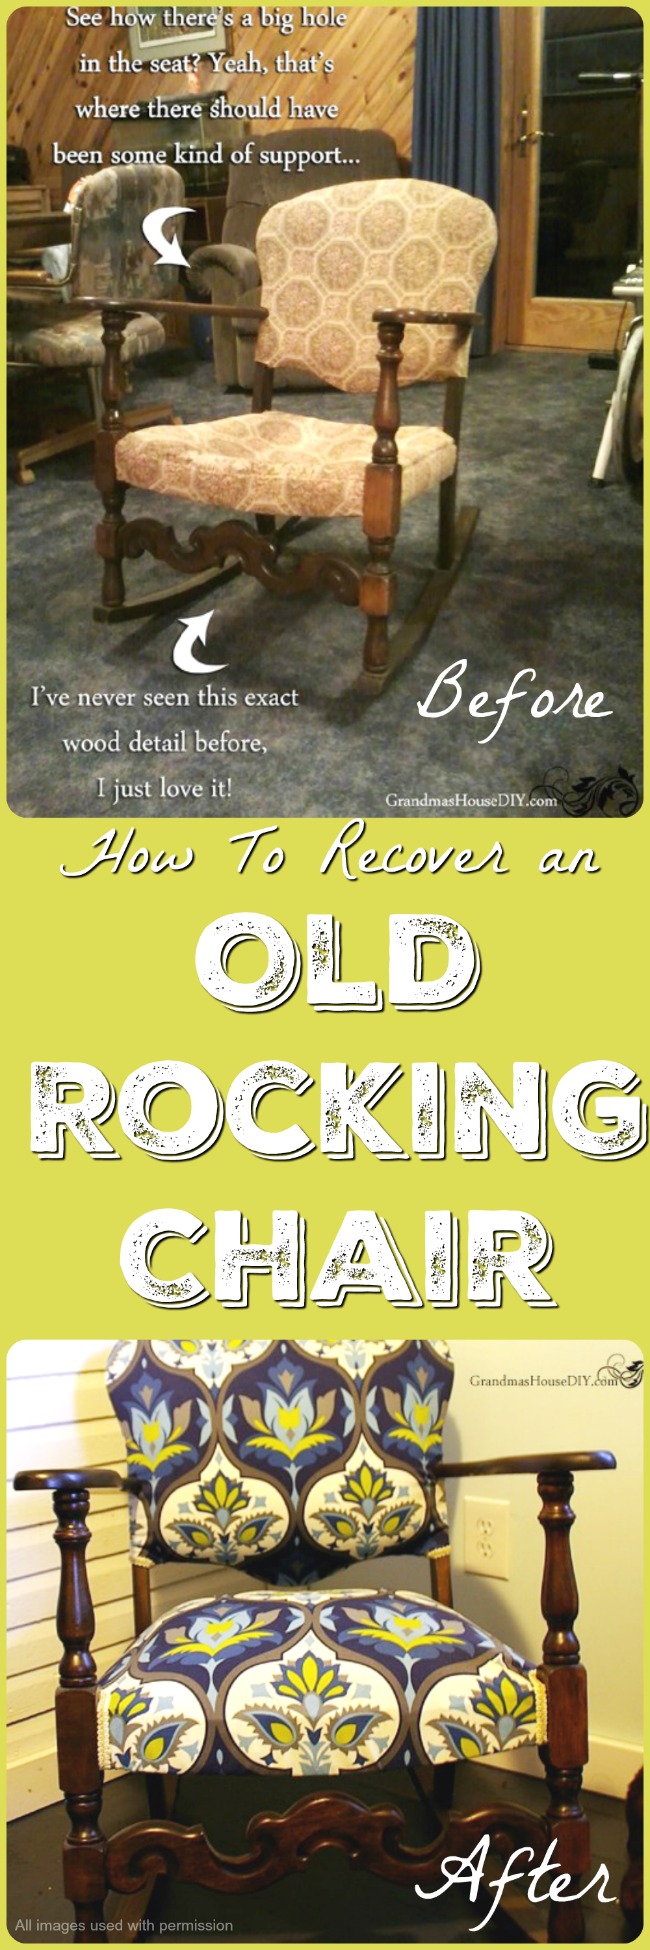 how-to-recover-an-old-rocking-chair